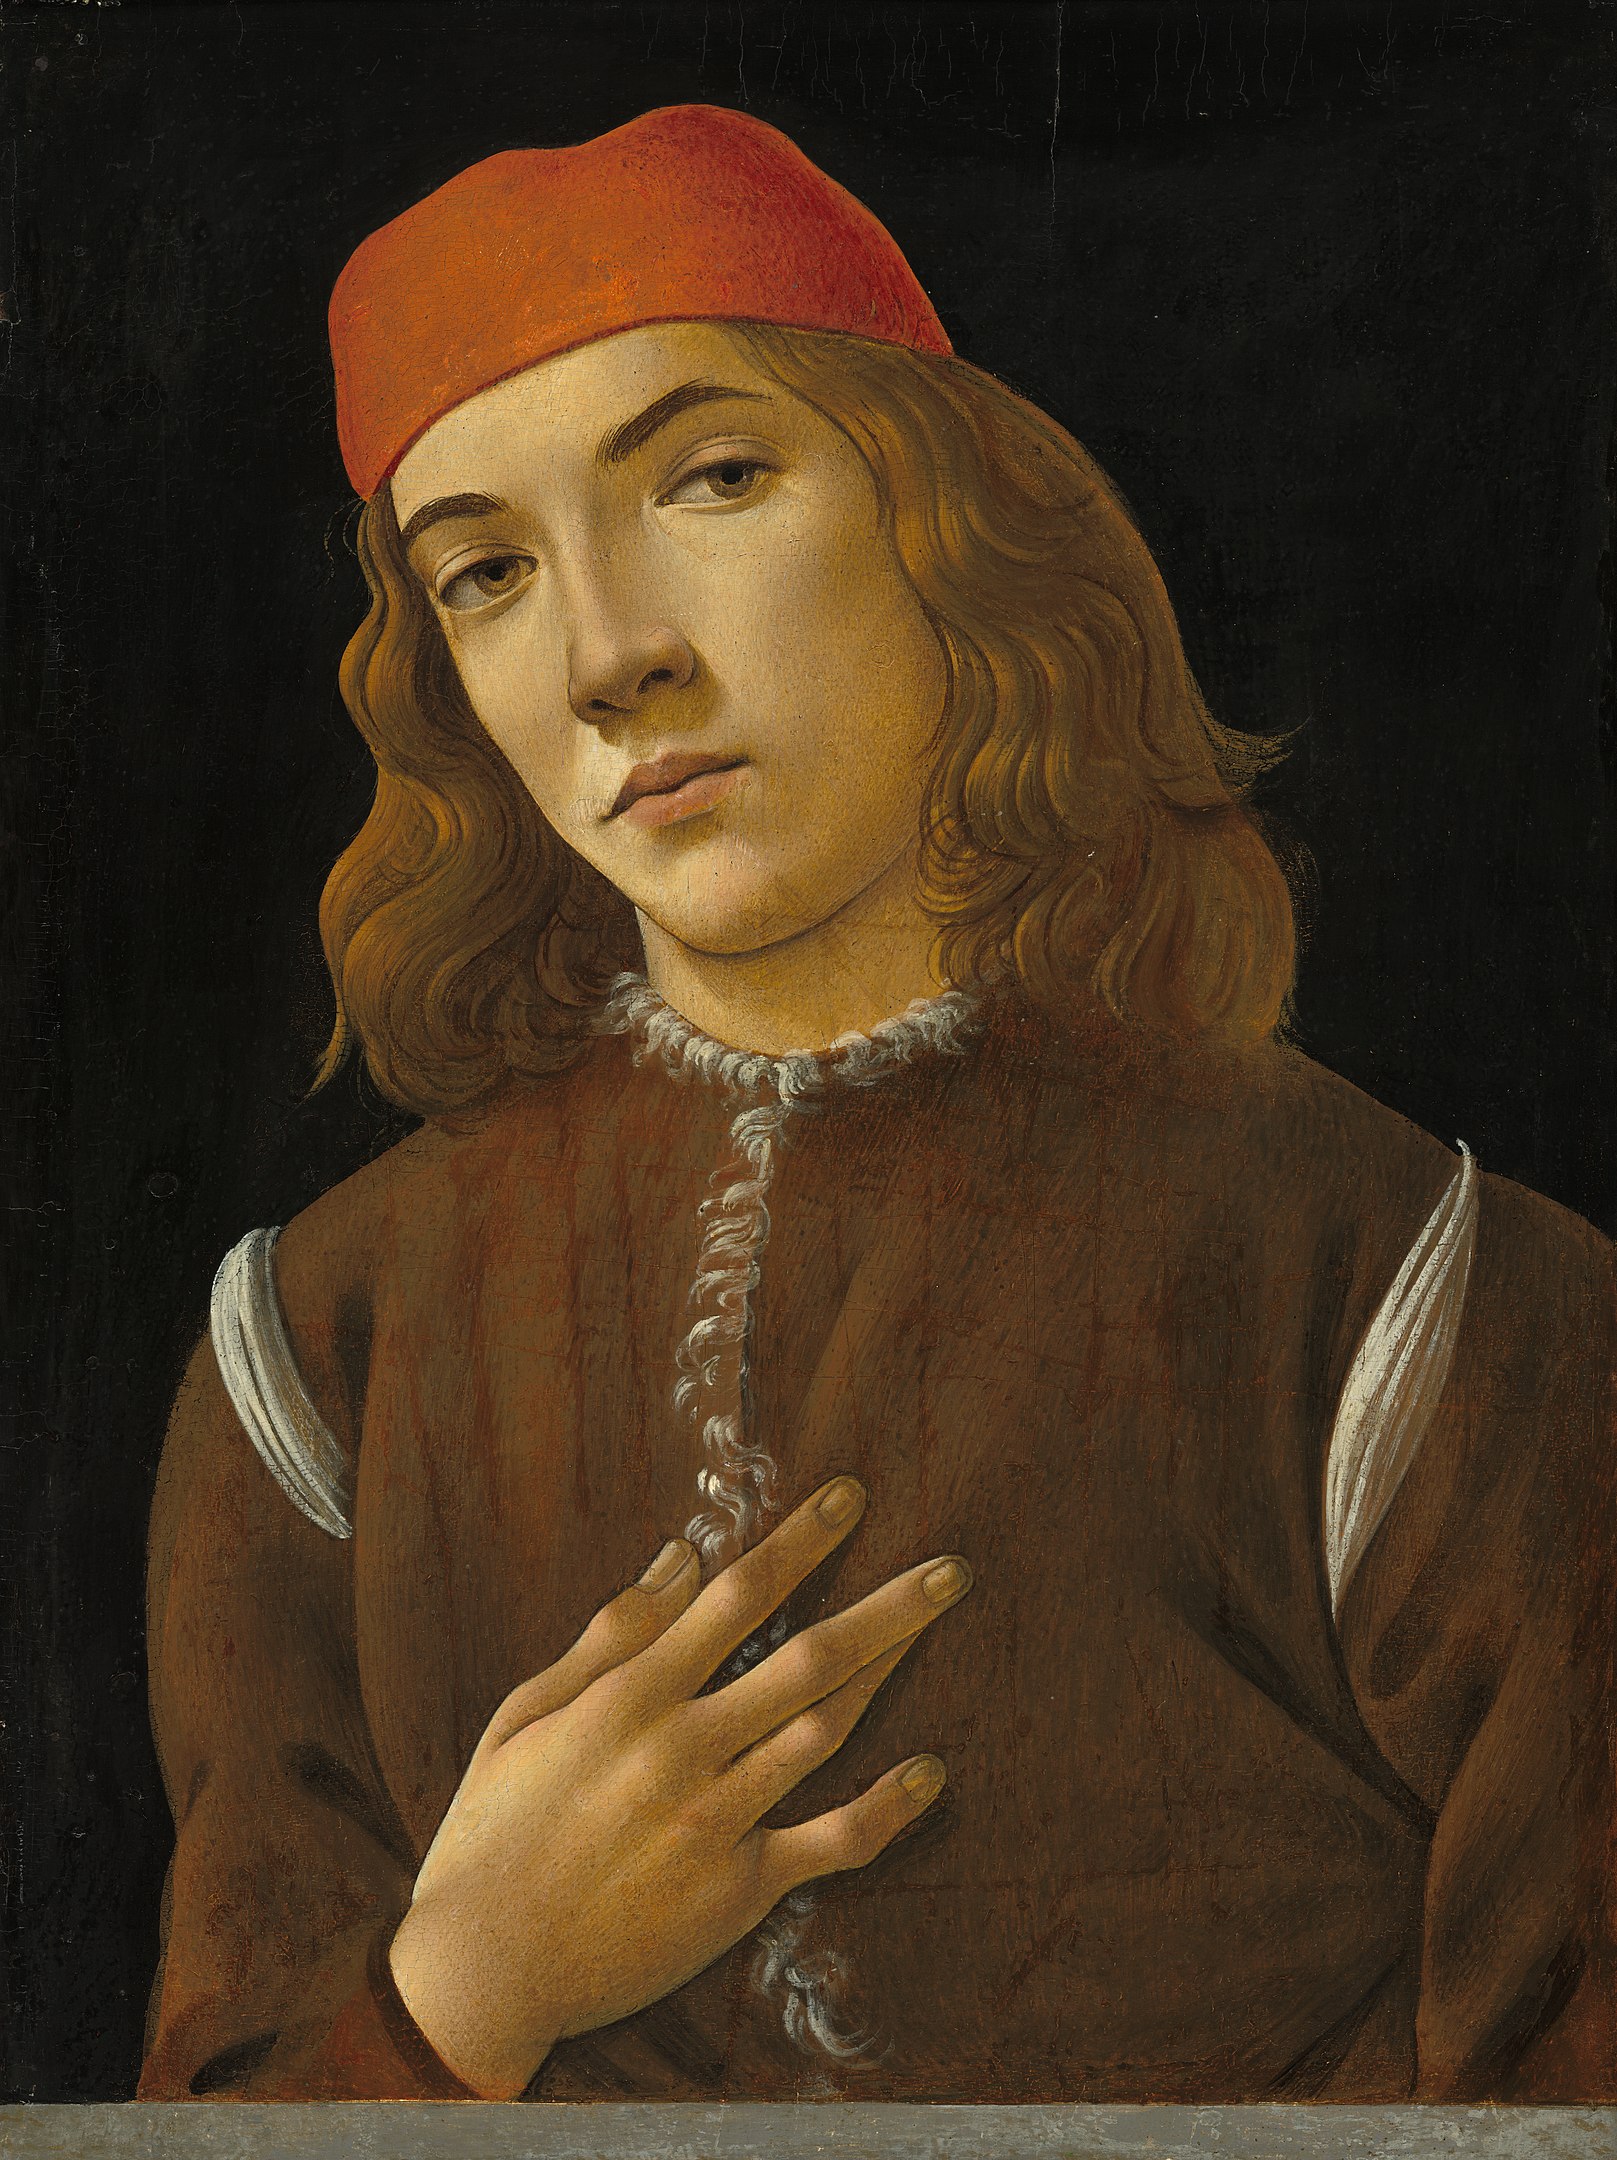 Portrait of a Young Man by Sandro Botticelli - c. 1483 - 43.5 x 46.2 cm National Gallery of Art